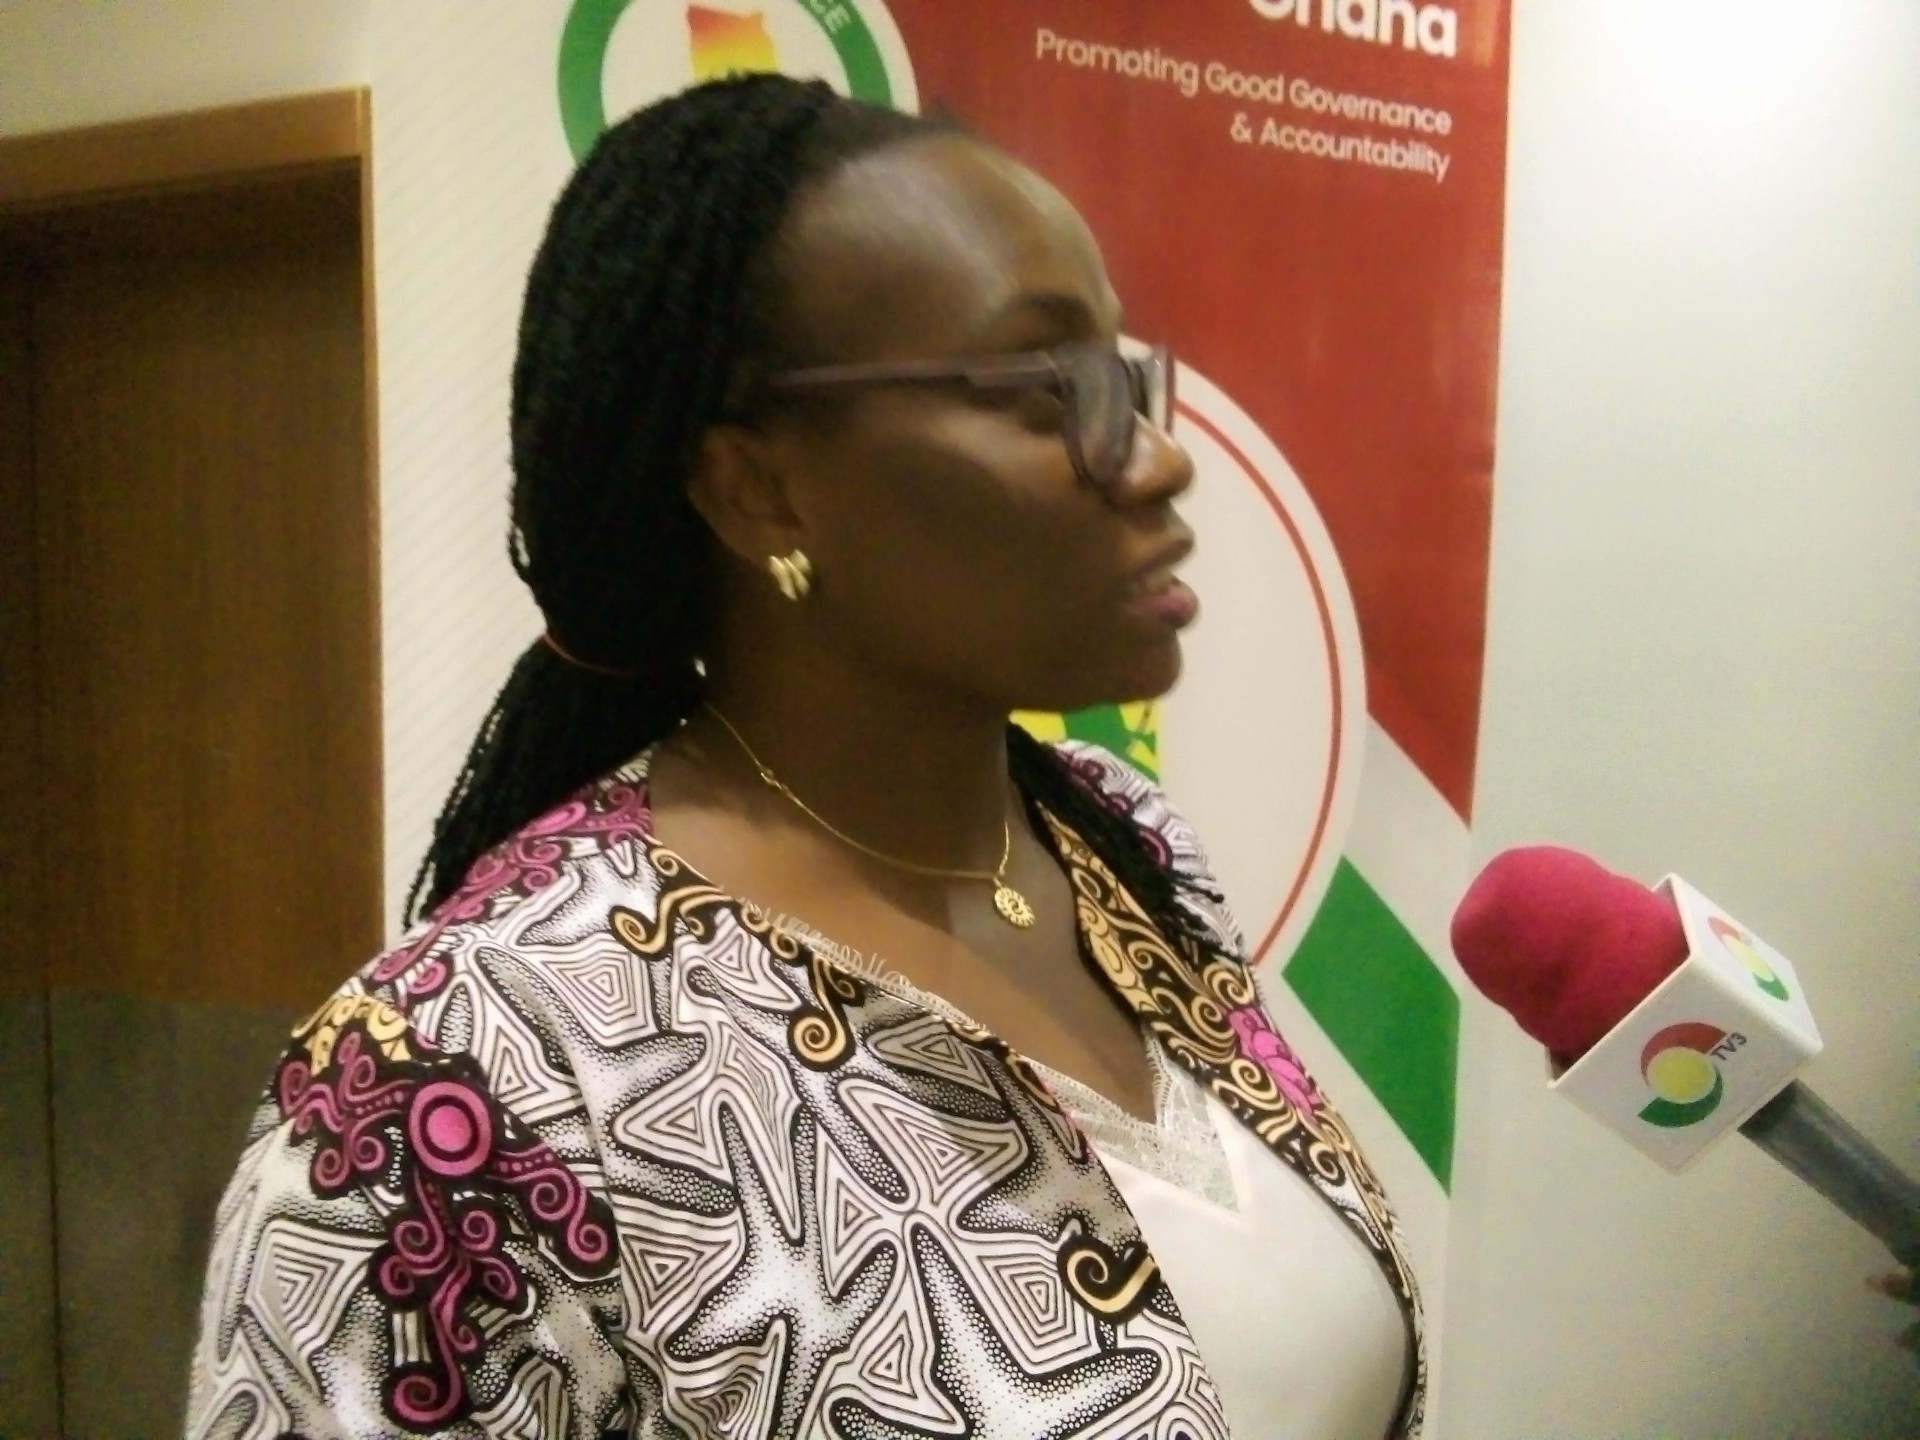 Ghanaians urged to continue reporting suspected cases of mismanagement, other irregularities to Auditor-General